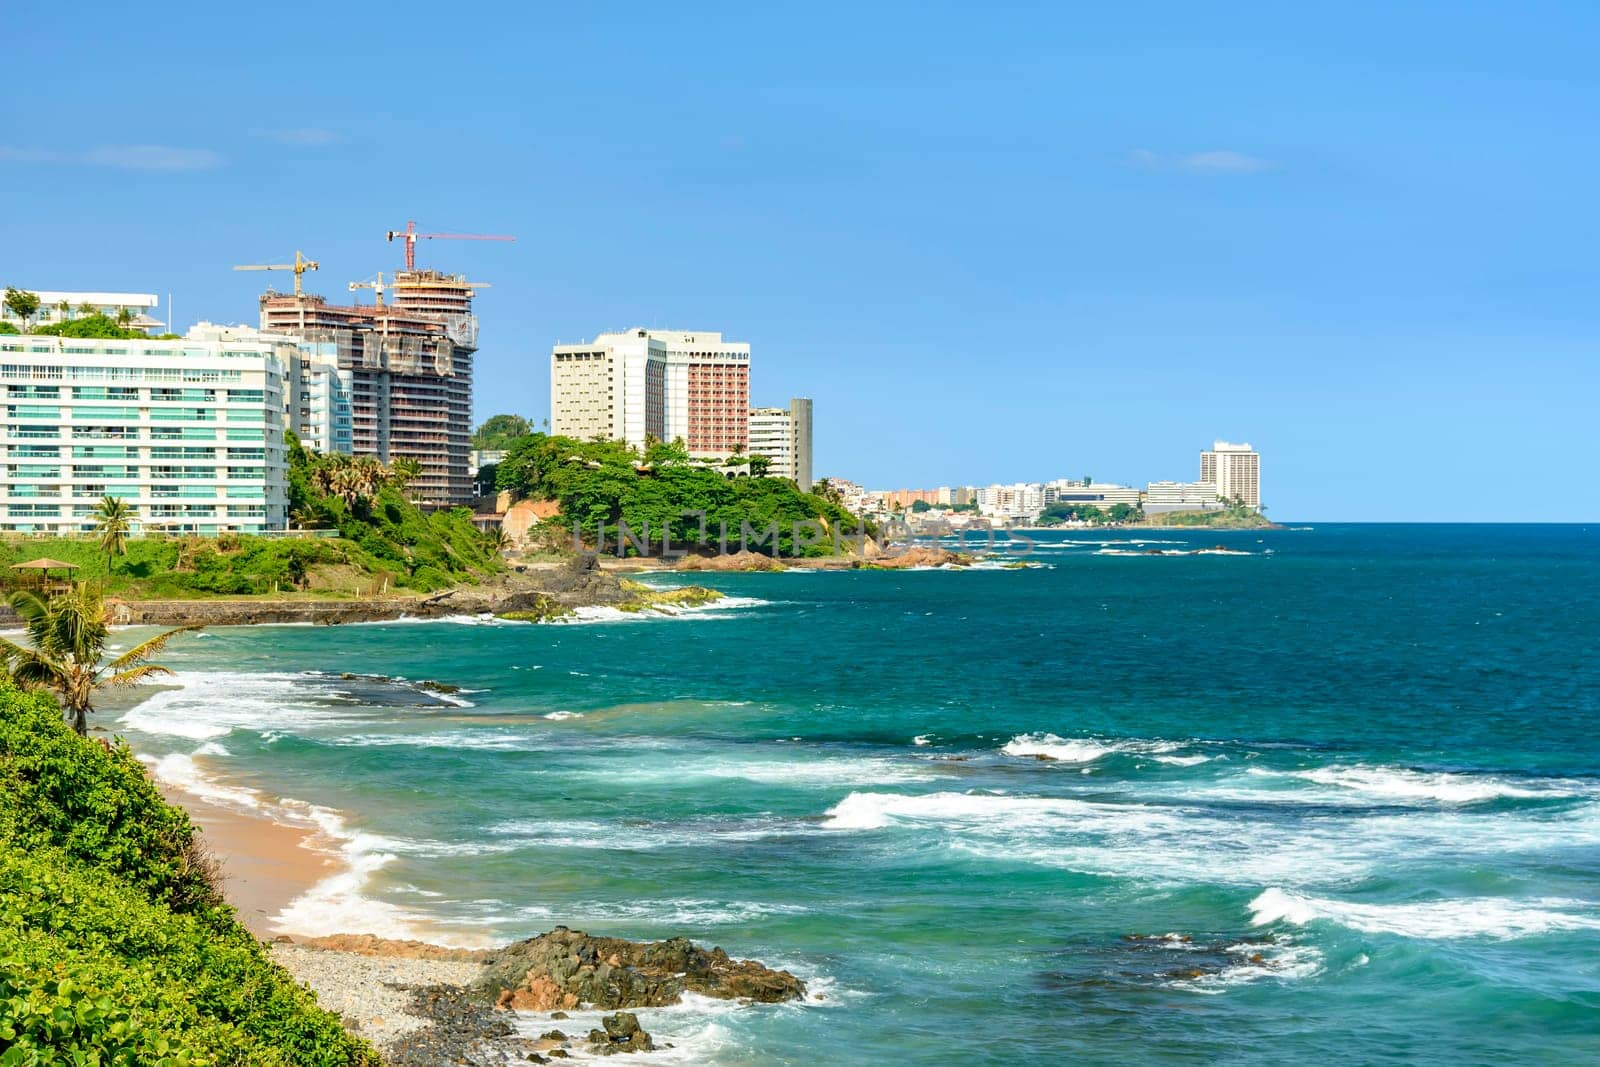 Paridisiac tropical beach in the urban area of the city of Salvador in the state of Bahia, Brazil